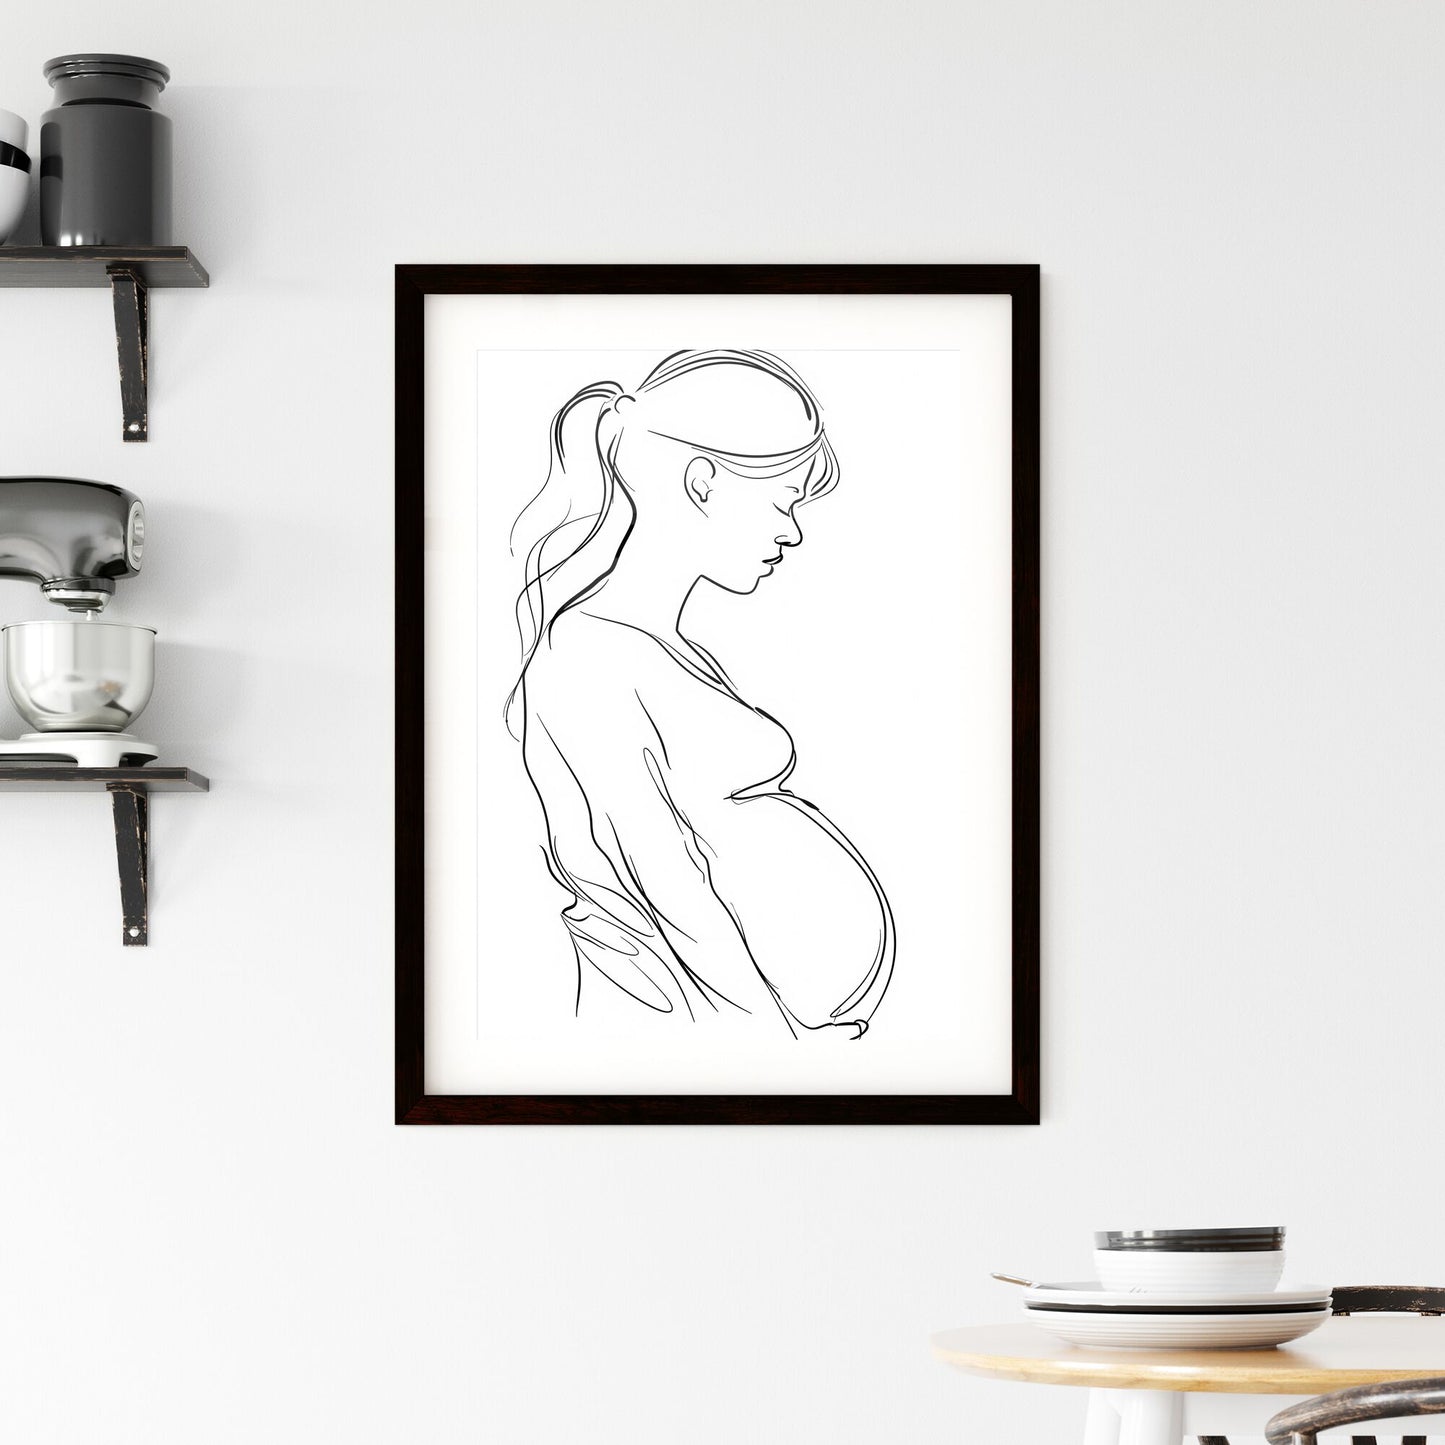 Fluid artwork portrays the essence of a vibrant, pregnant woman in a captivating single-line continuous drawing Default Title